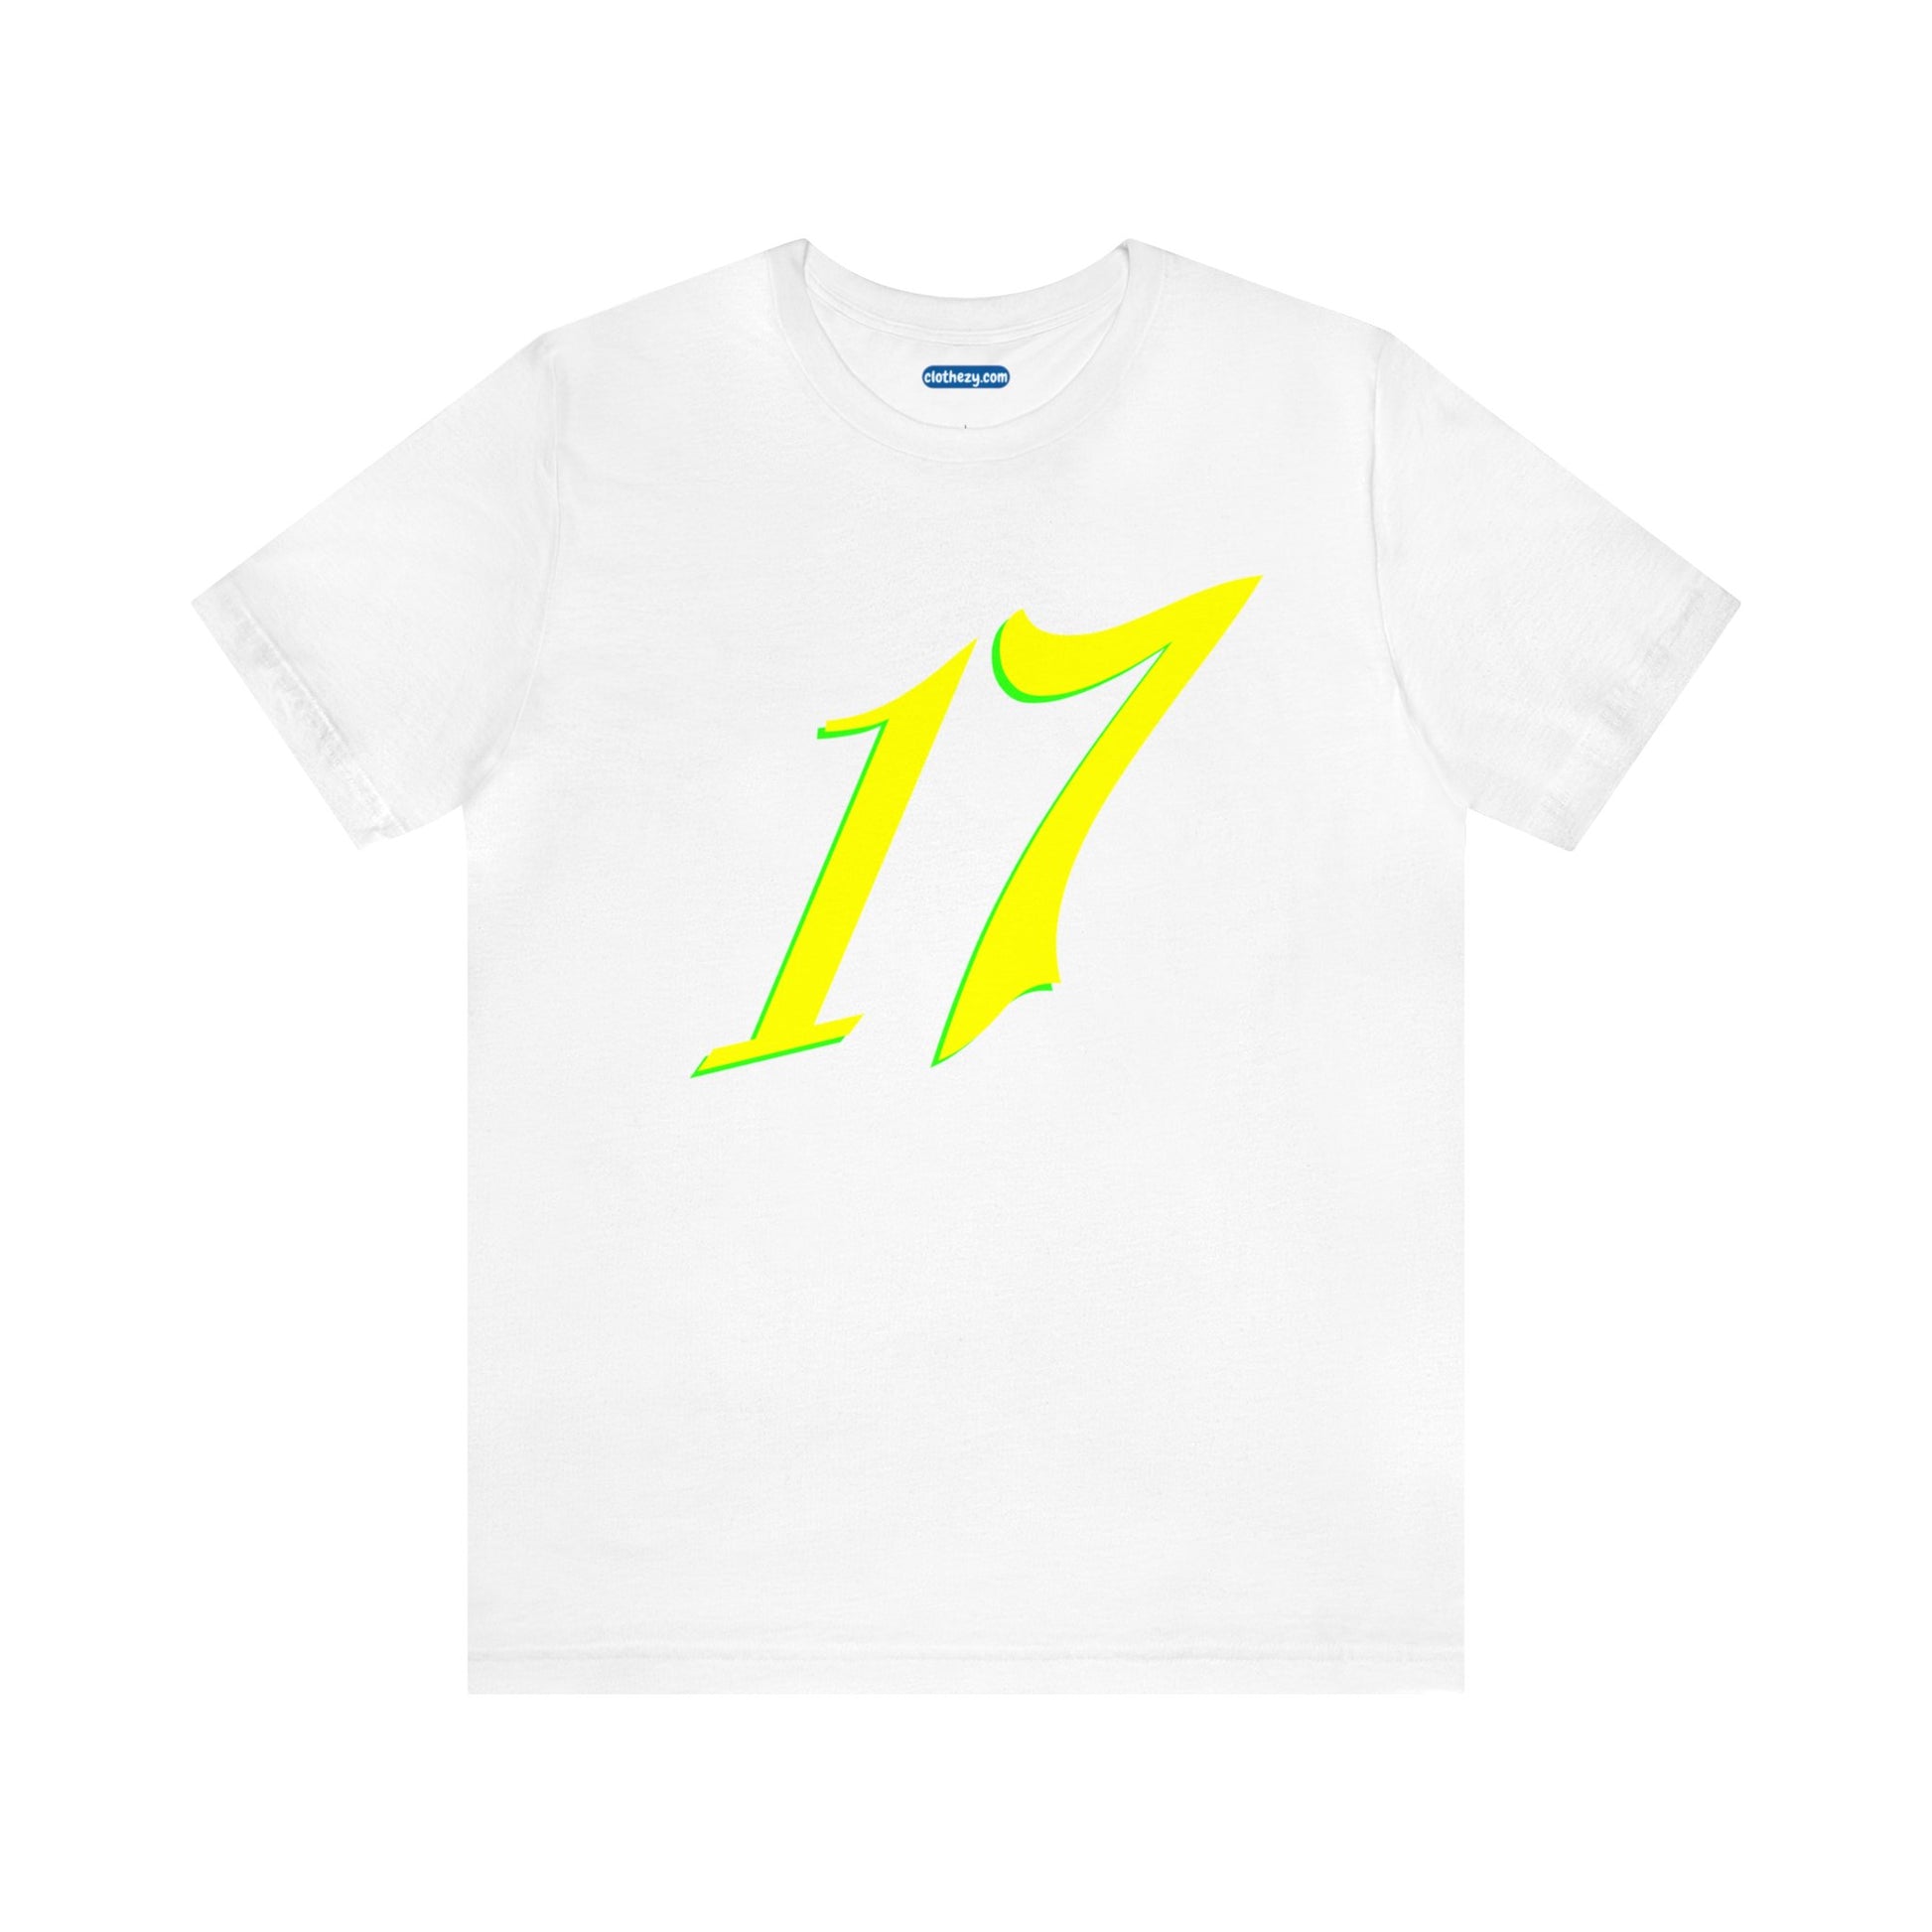 Number 17 Design - Soft Cotton Tee for birthdays and celebrations, Gift for friends and family, Multiple Options by clothezy.com in White Size Small - Buy Now